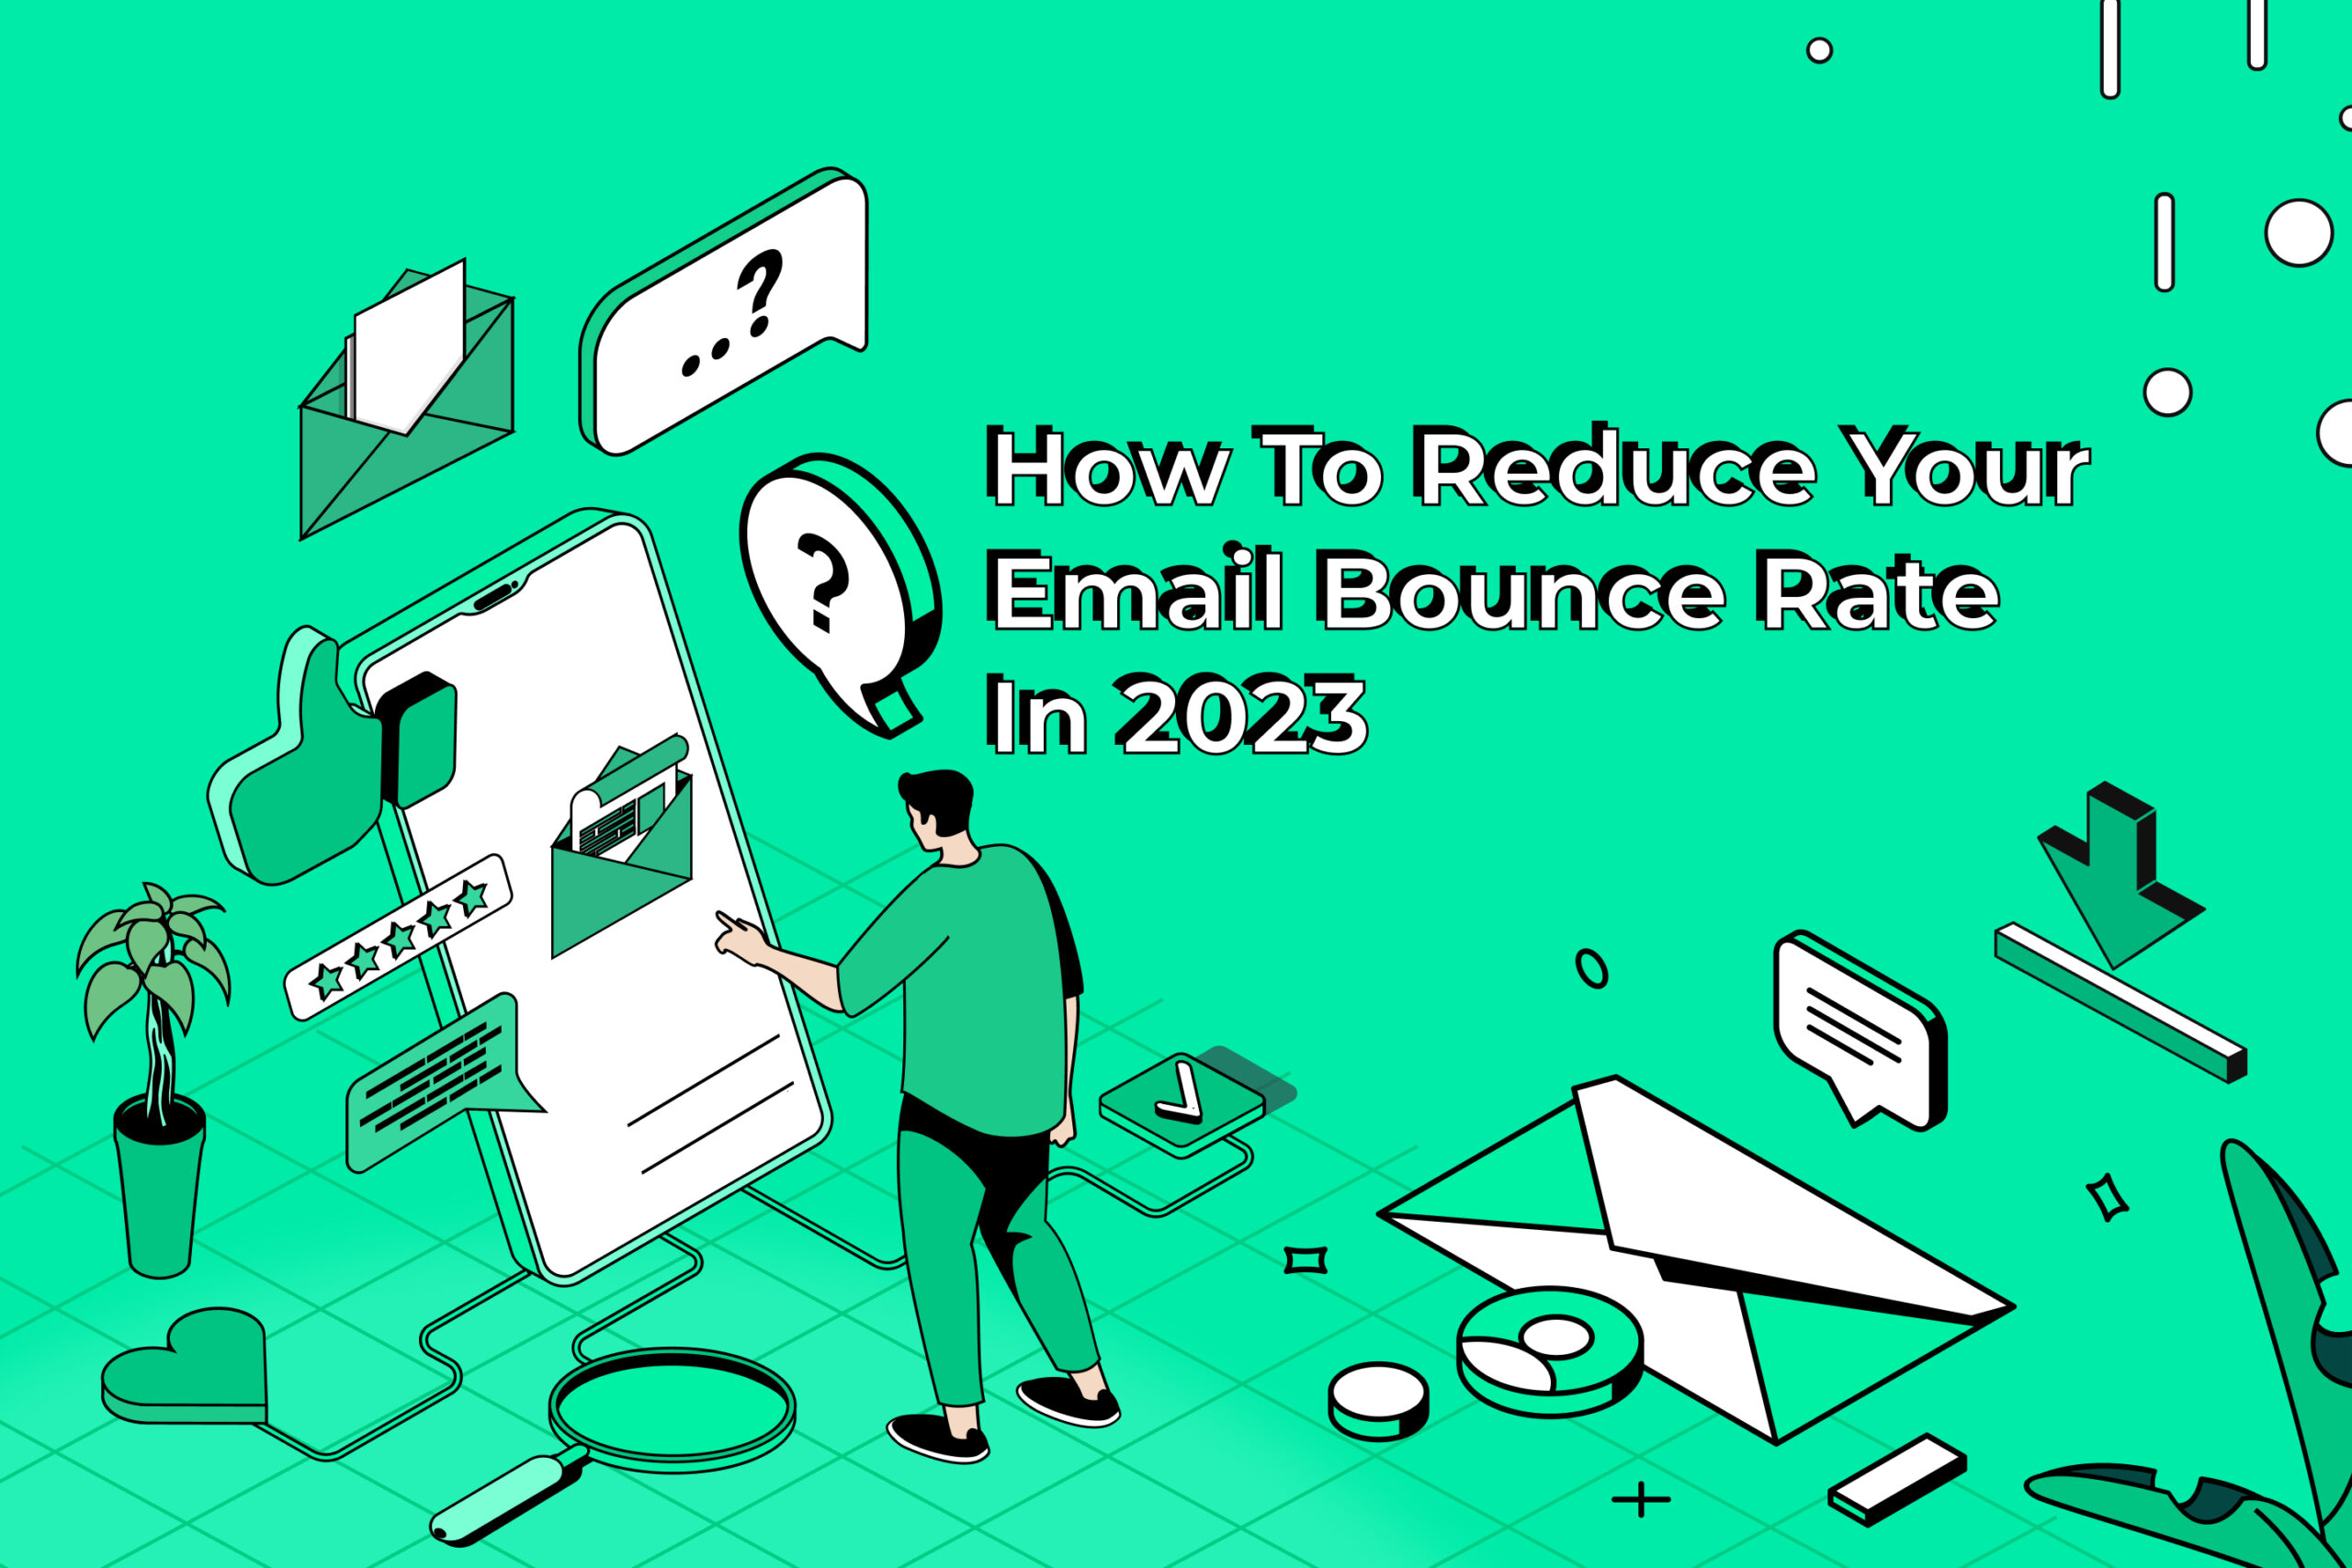 How To Reduce Your Email Bounce Rate In 2023 - DirectIQ